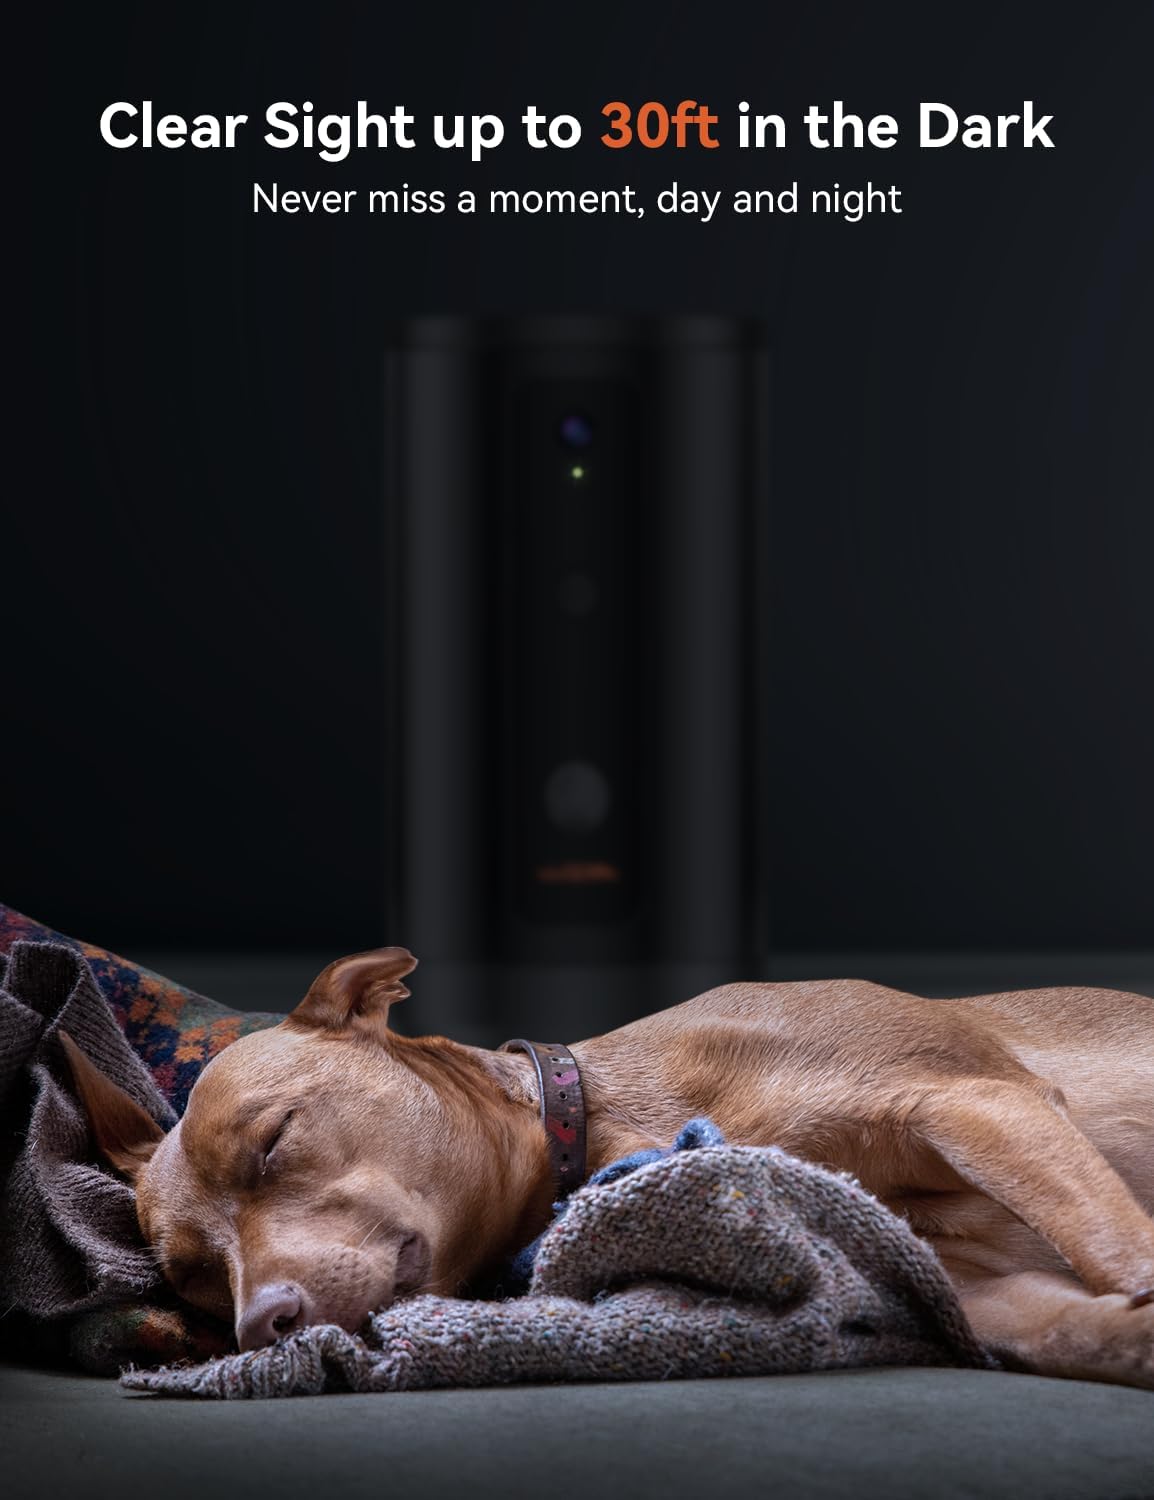 WOPET D100 5G WiFi Dog Camera, 300 Rotating Pet Camera Treat Dispenser with 165 Wide Angle View for Phone App Monitor Pets, 1080P HD, 2-Way Audio, Night Vision, No Monthly Fee